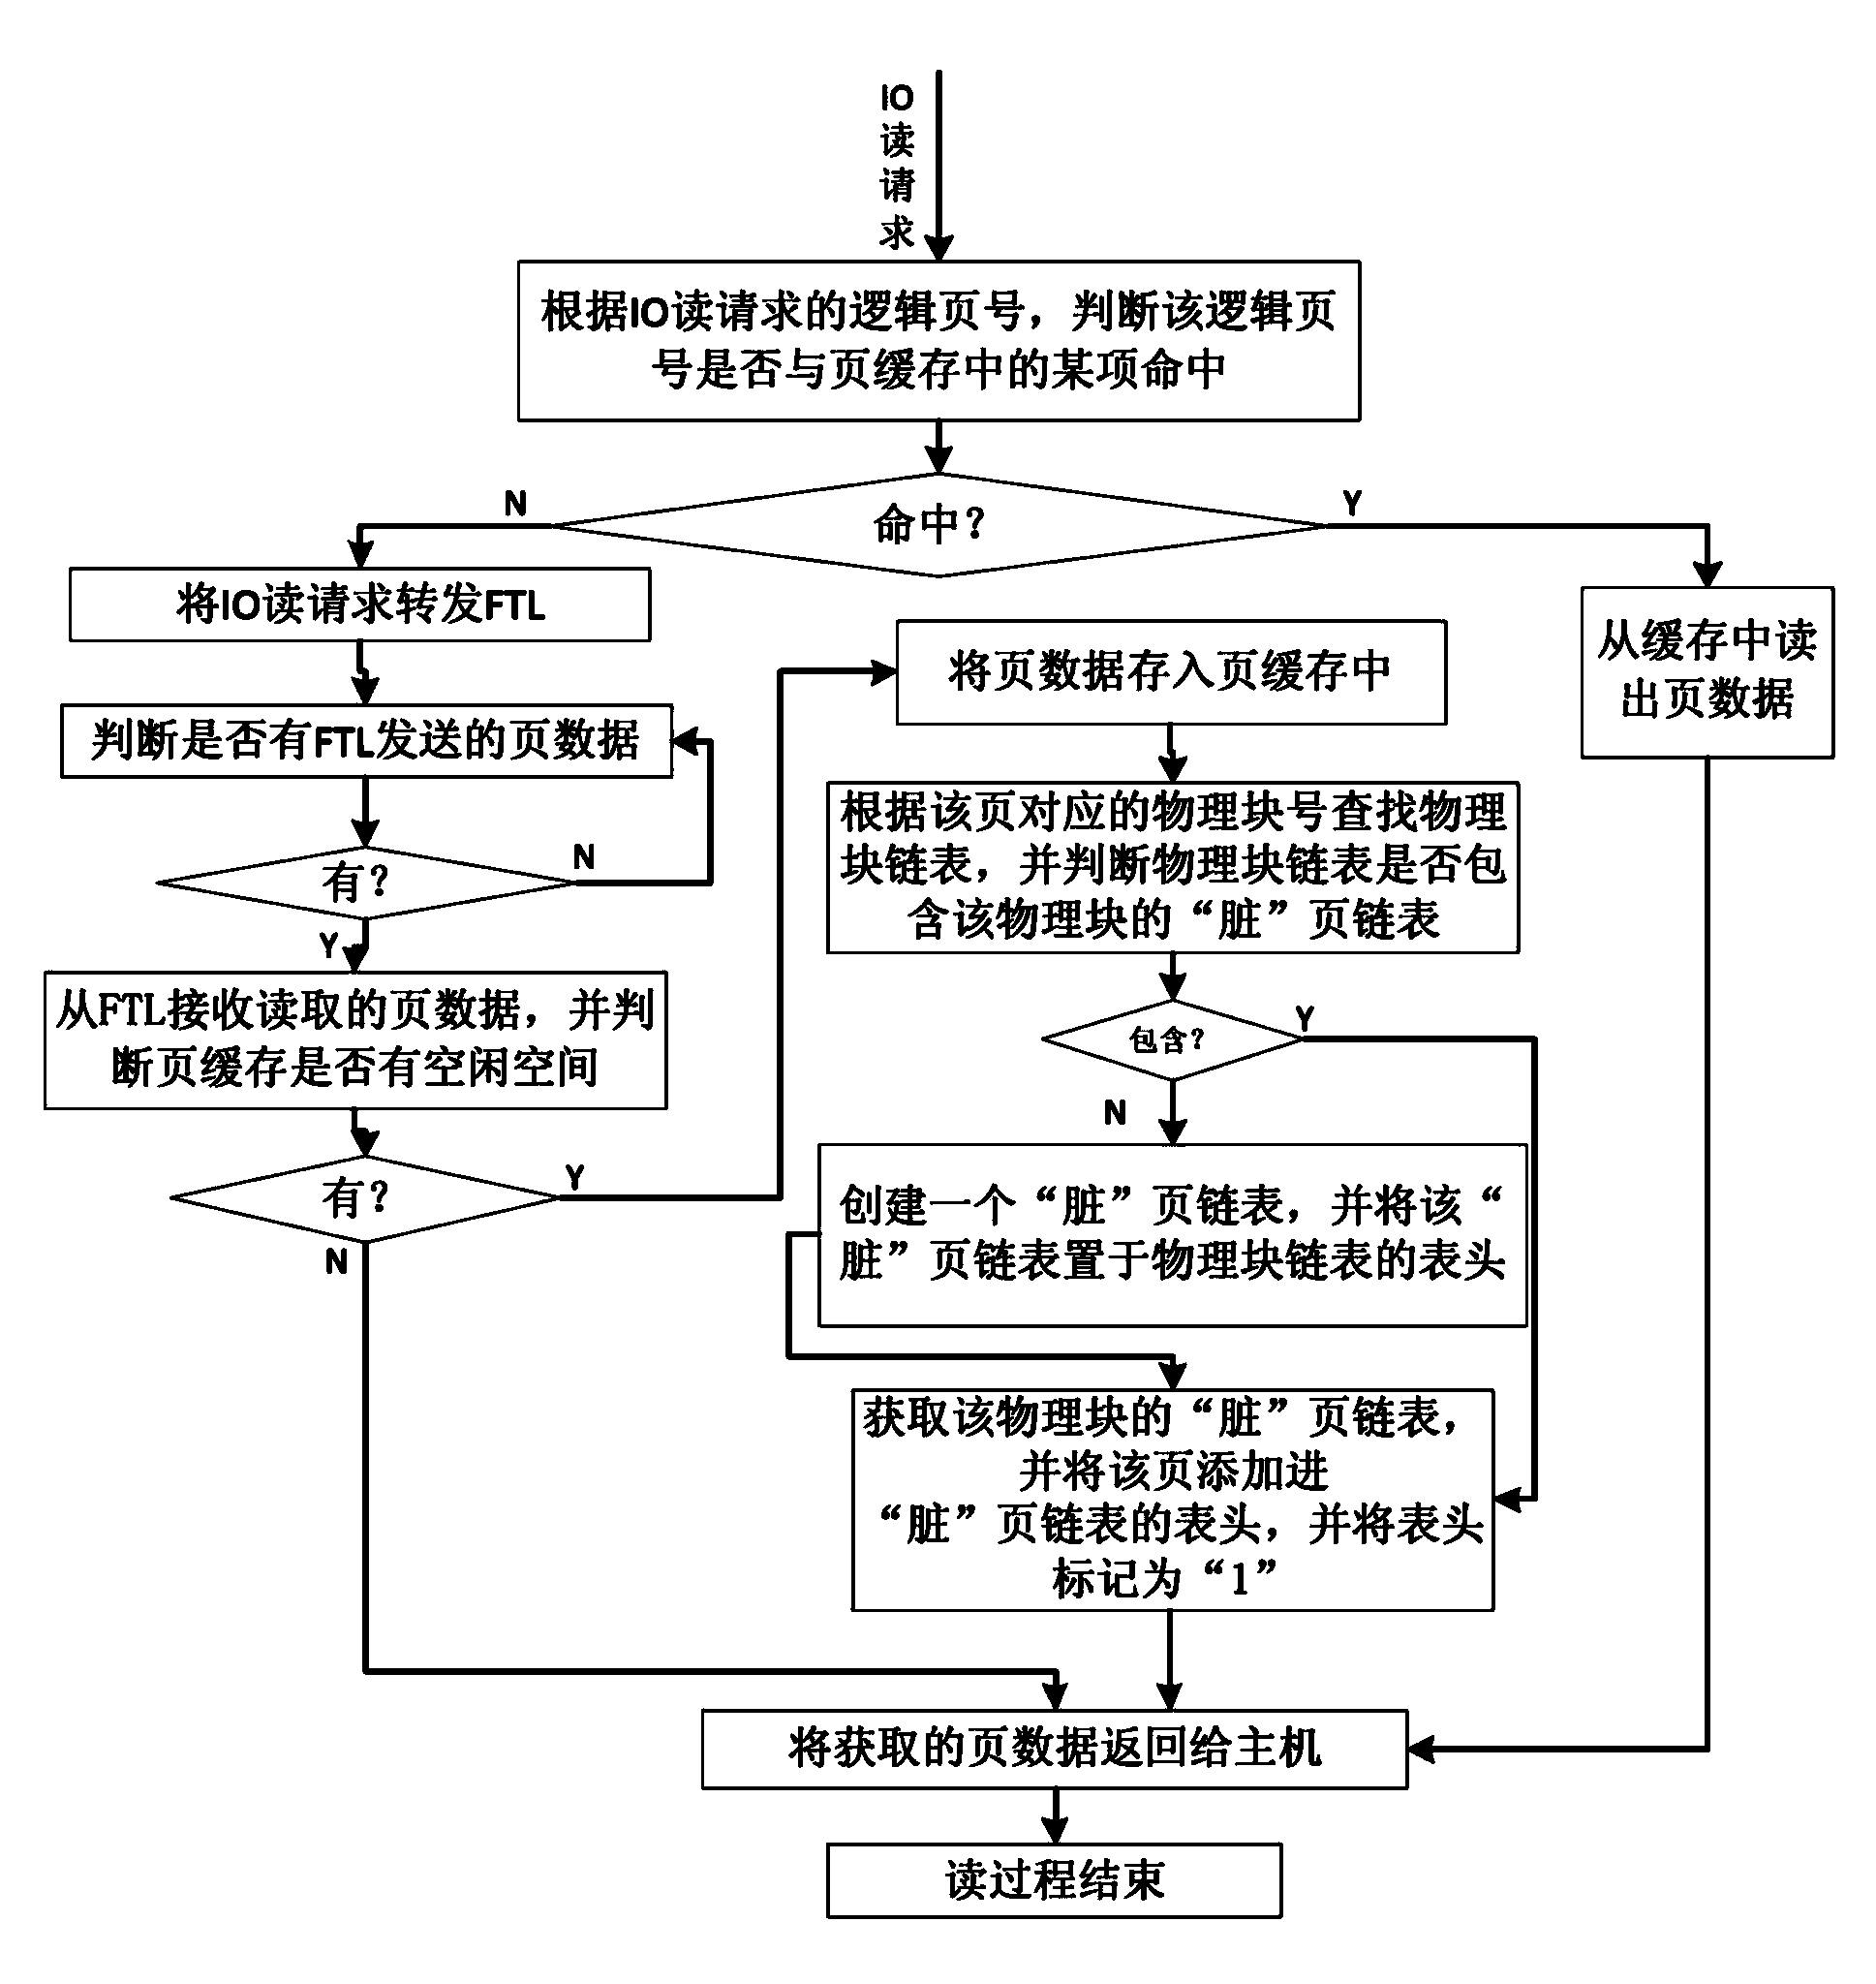 Cache management method for solid-state disc